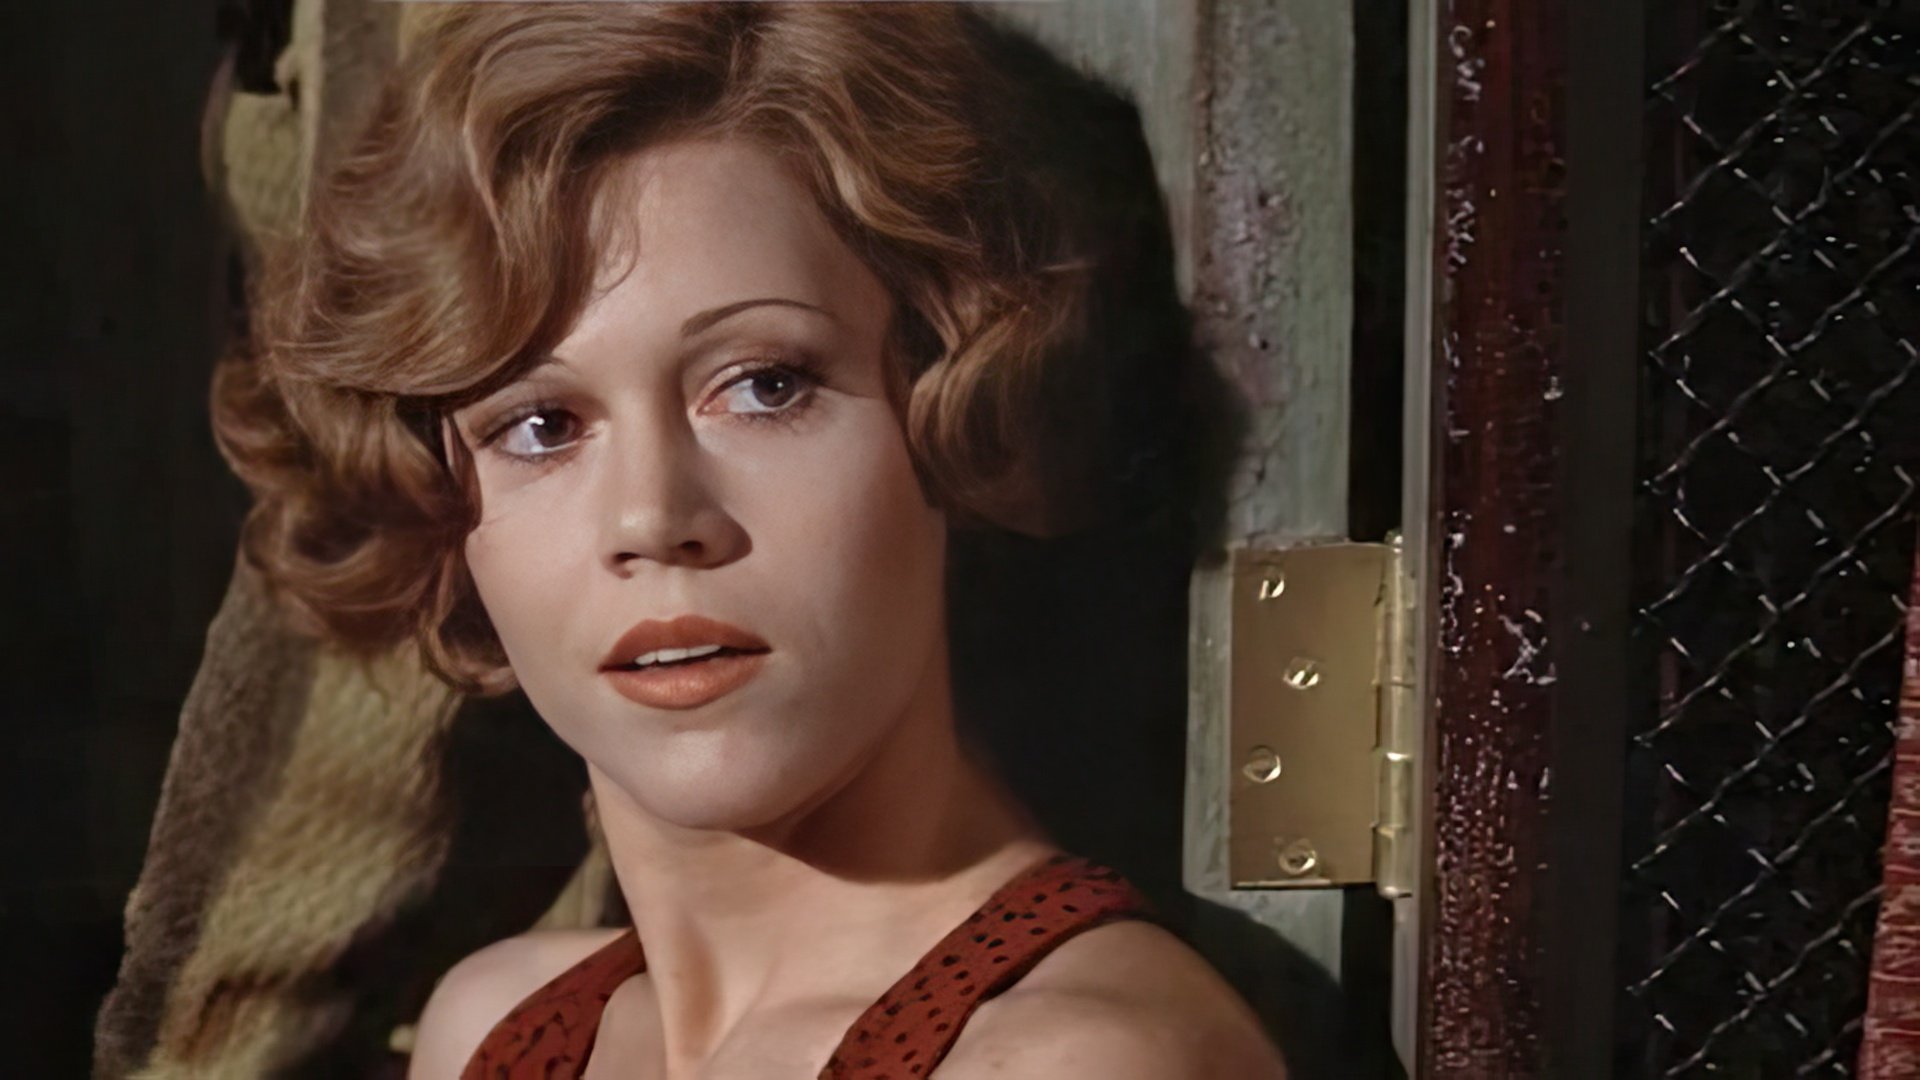 Jane Fonda in the movie 'They Shoot Horses, Don't They?'